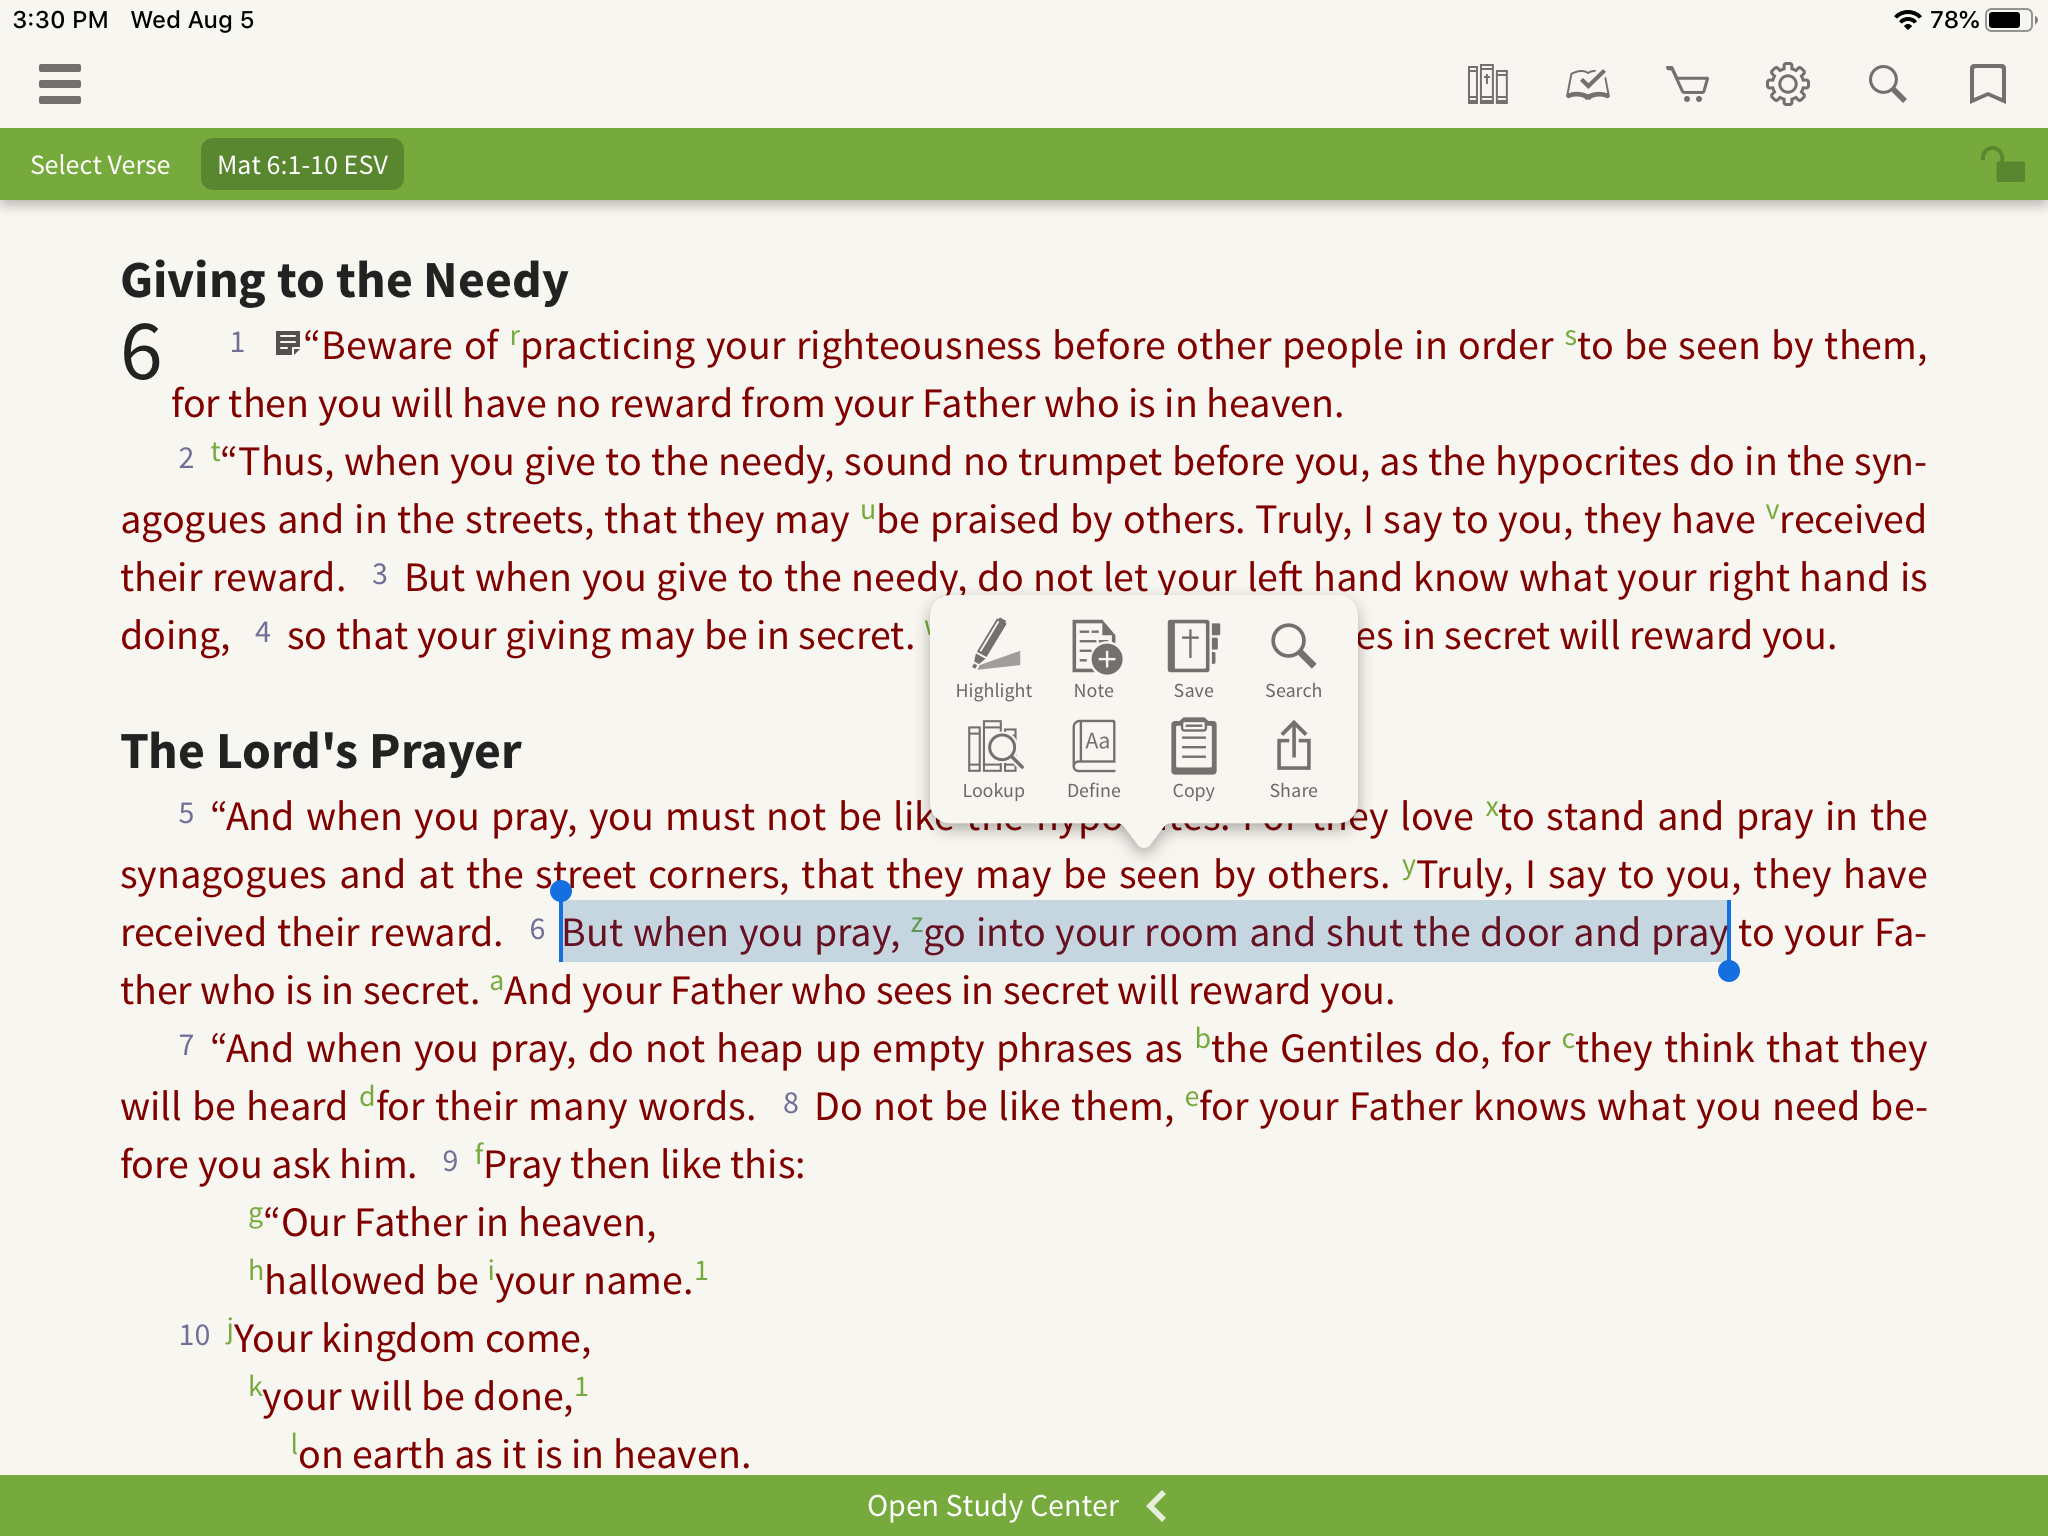 word-based note in the olive tree bible app